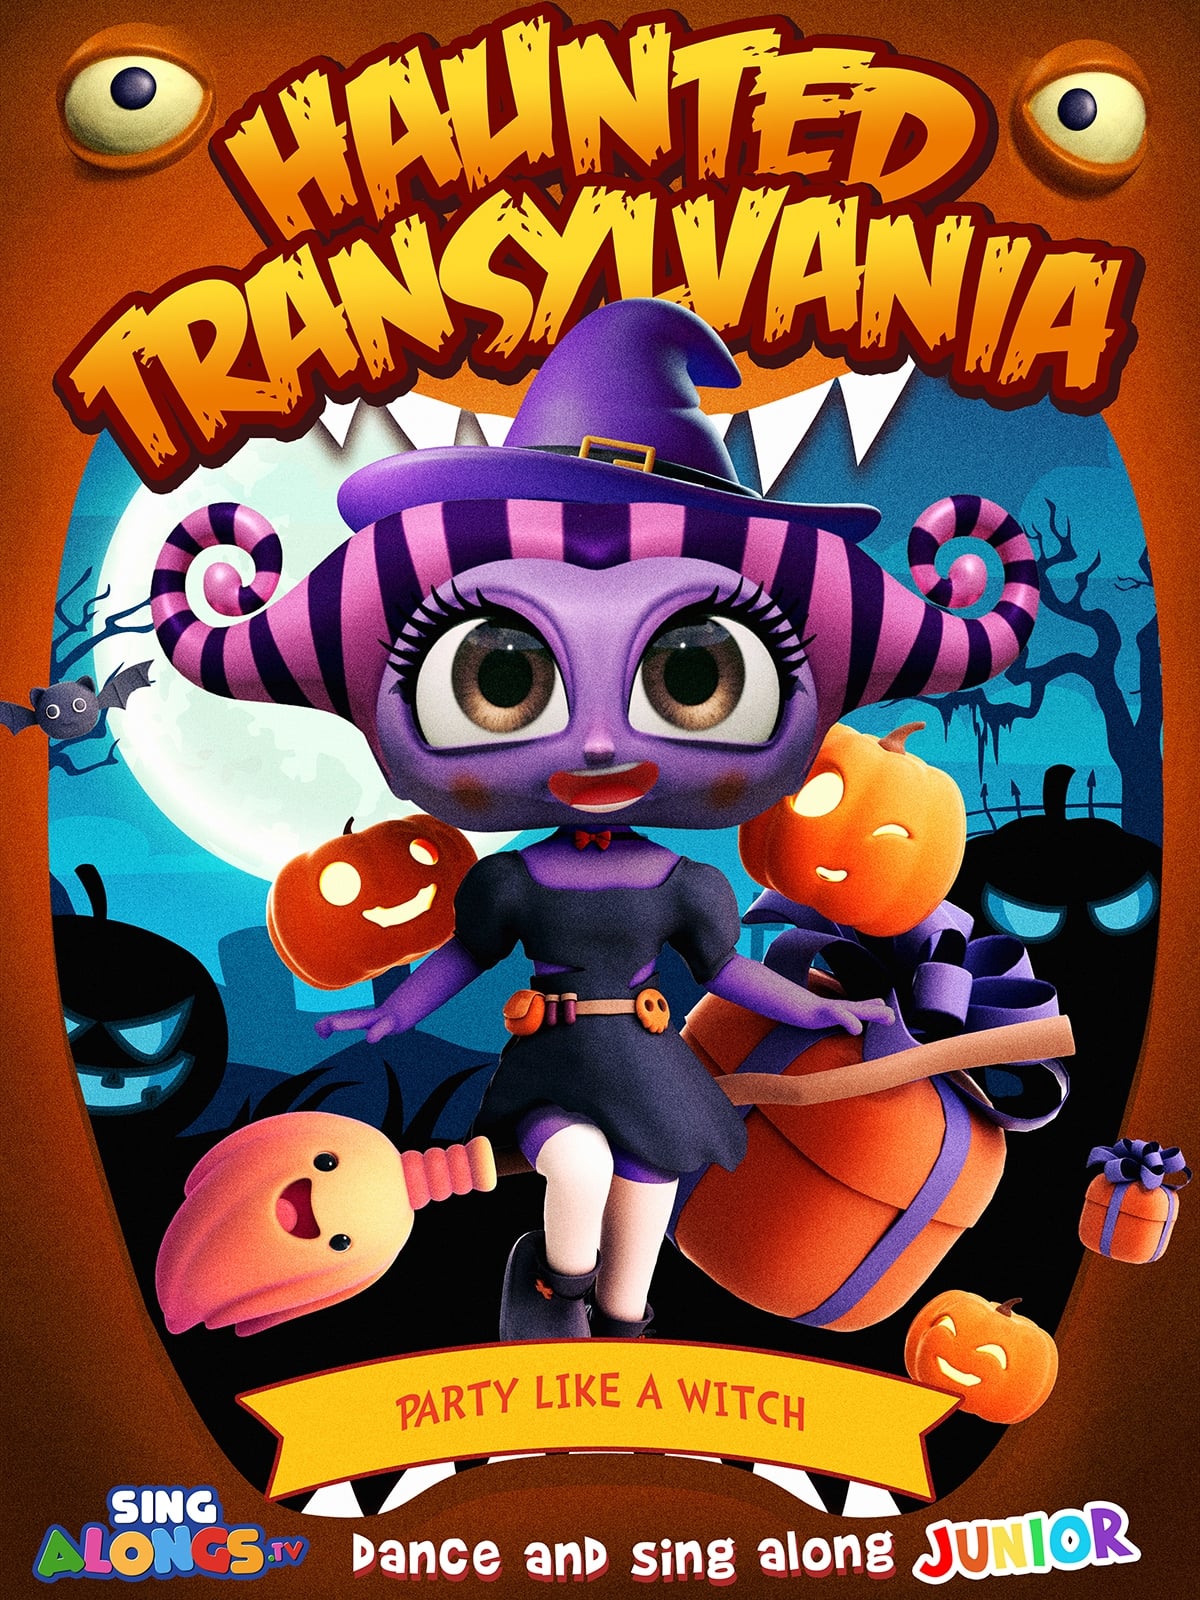 Haunted Transylvania: Party Like A Witch